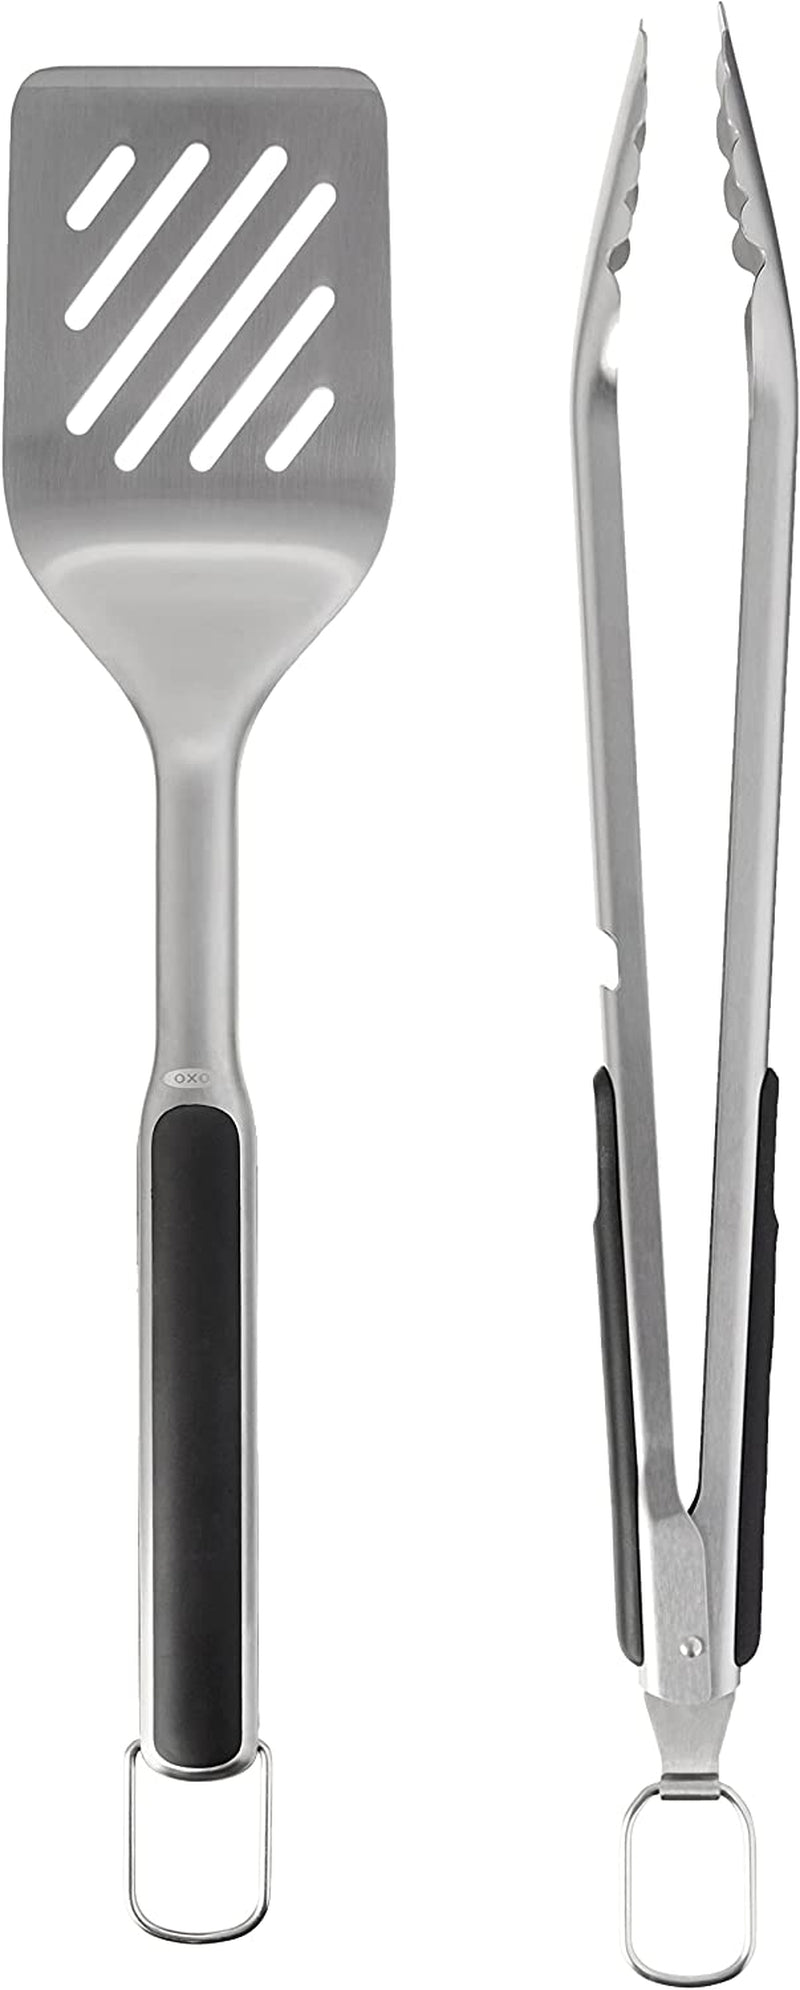 OXO Good Grips Grilling Tools, 5-Piece Set, Black